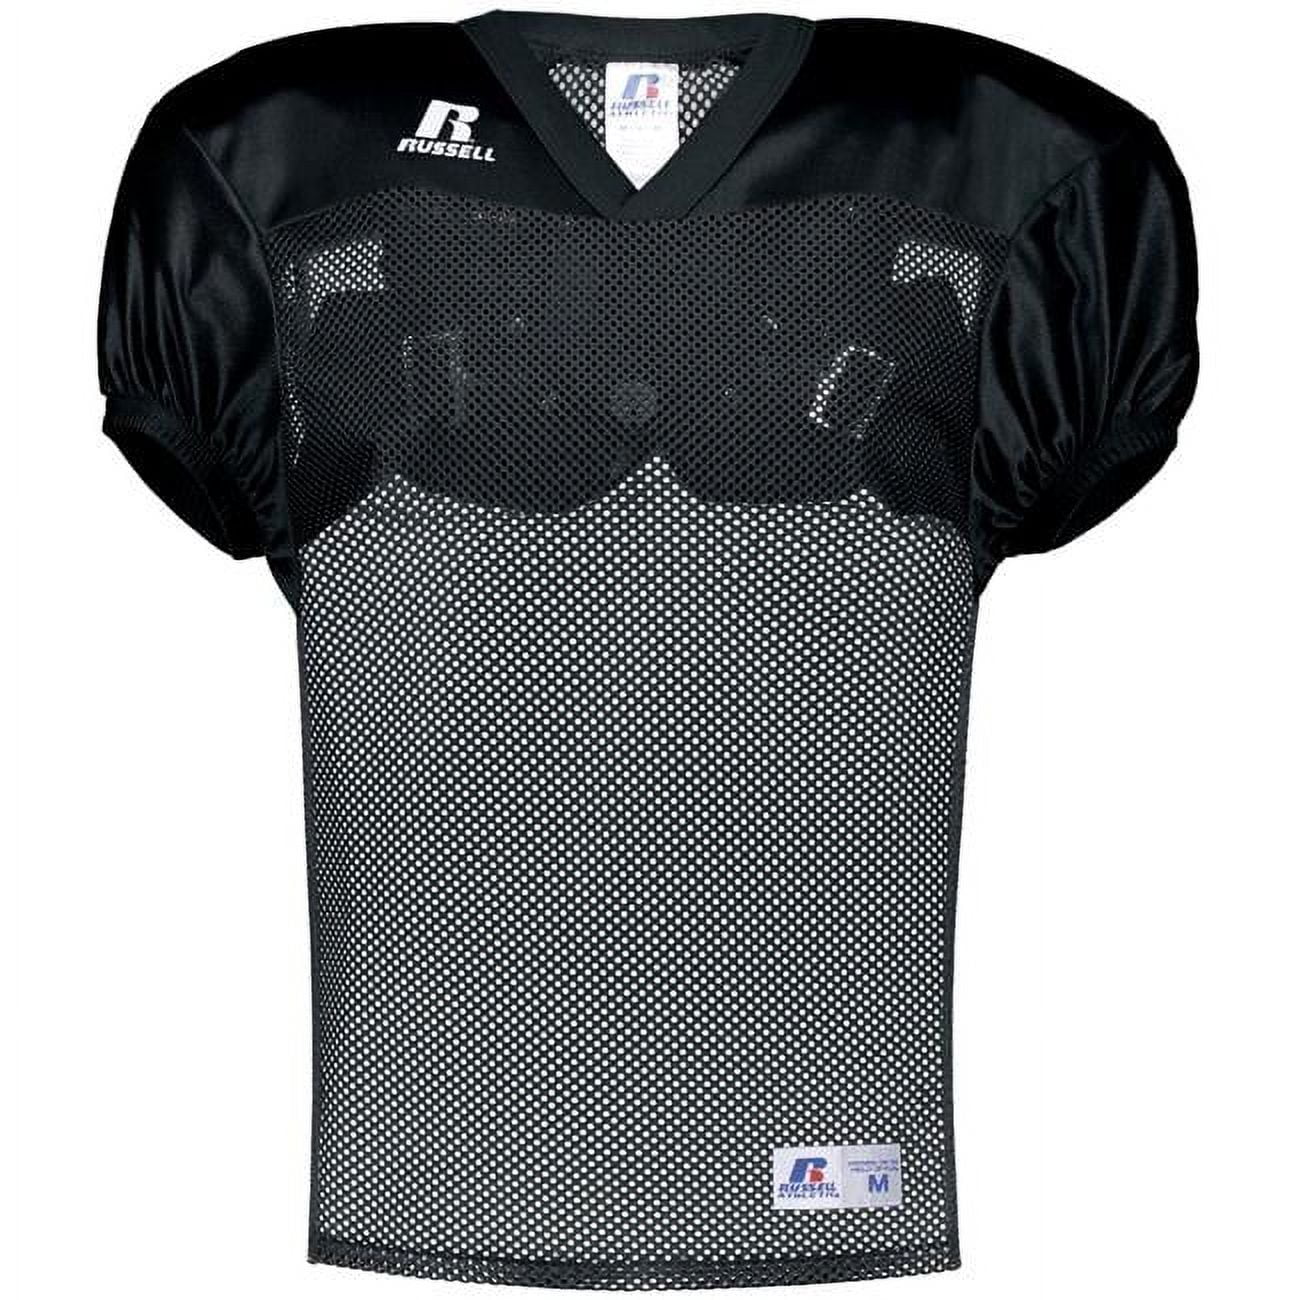 Adidas Youth Audible 2.0 Practice Football Jersey